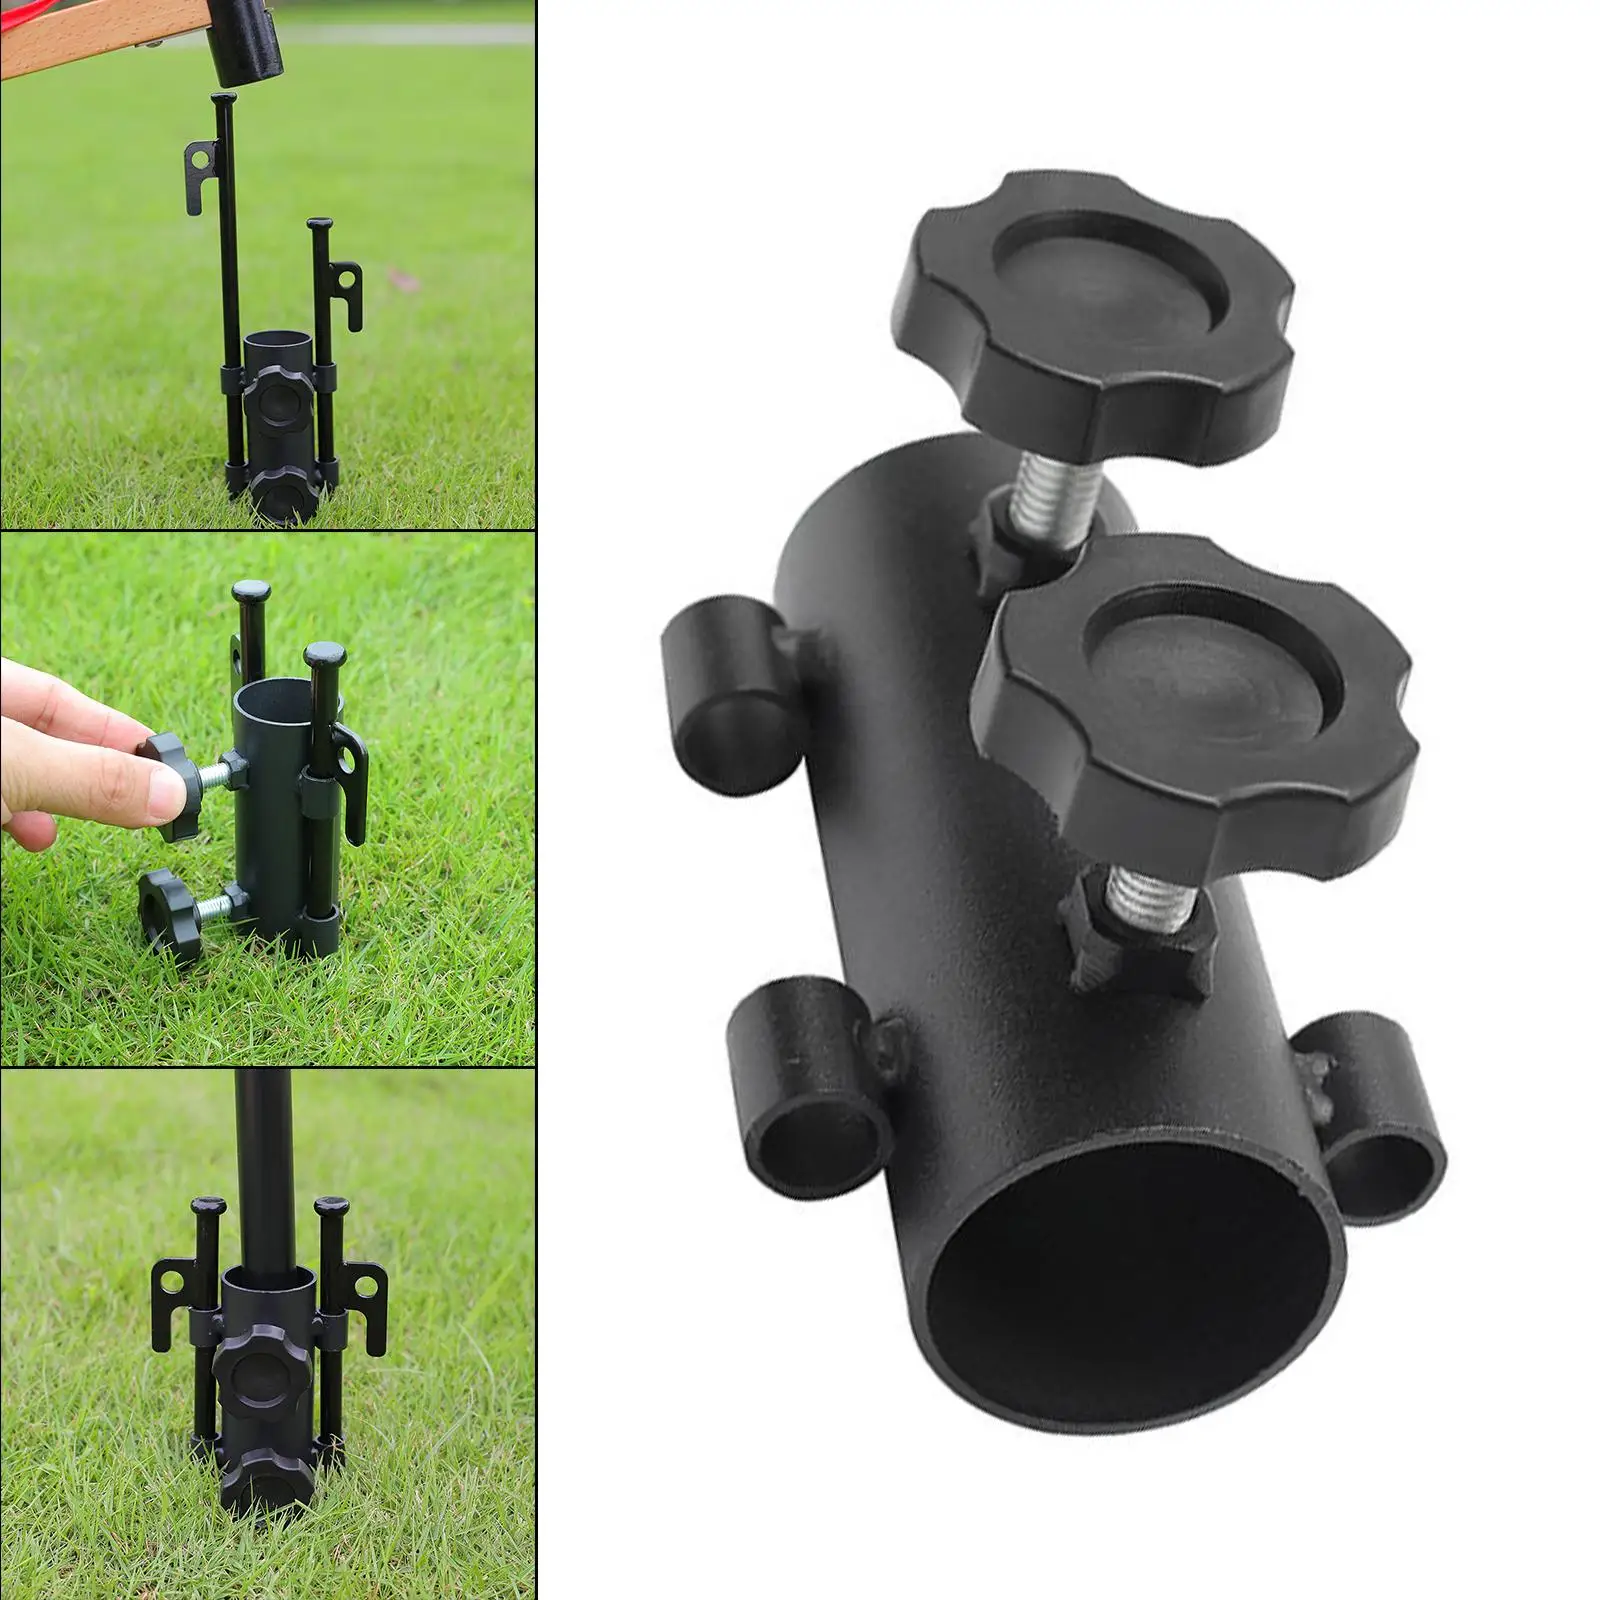 Awning Rod Holder Reinforced Canopy Poles Stand for BBQ Traveling Outdoor